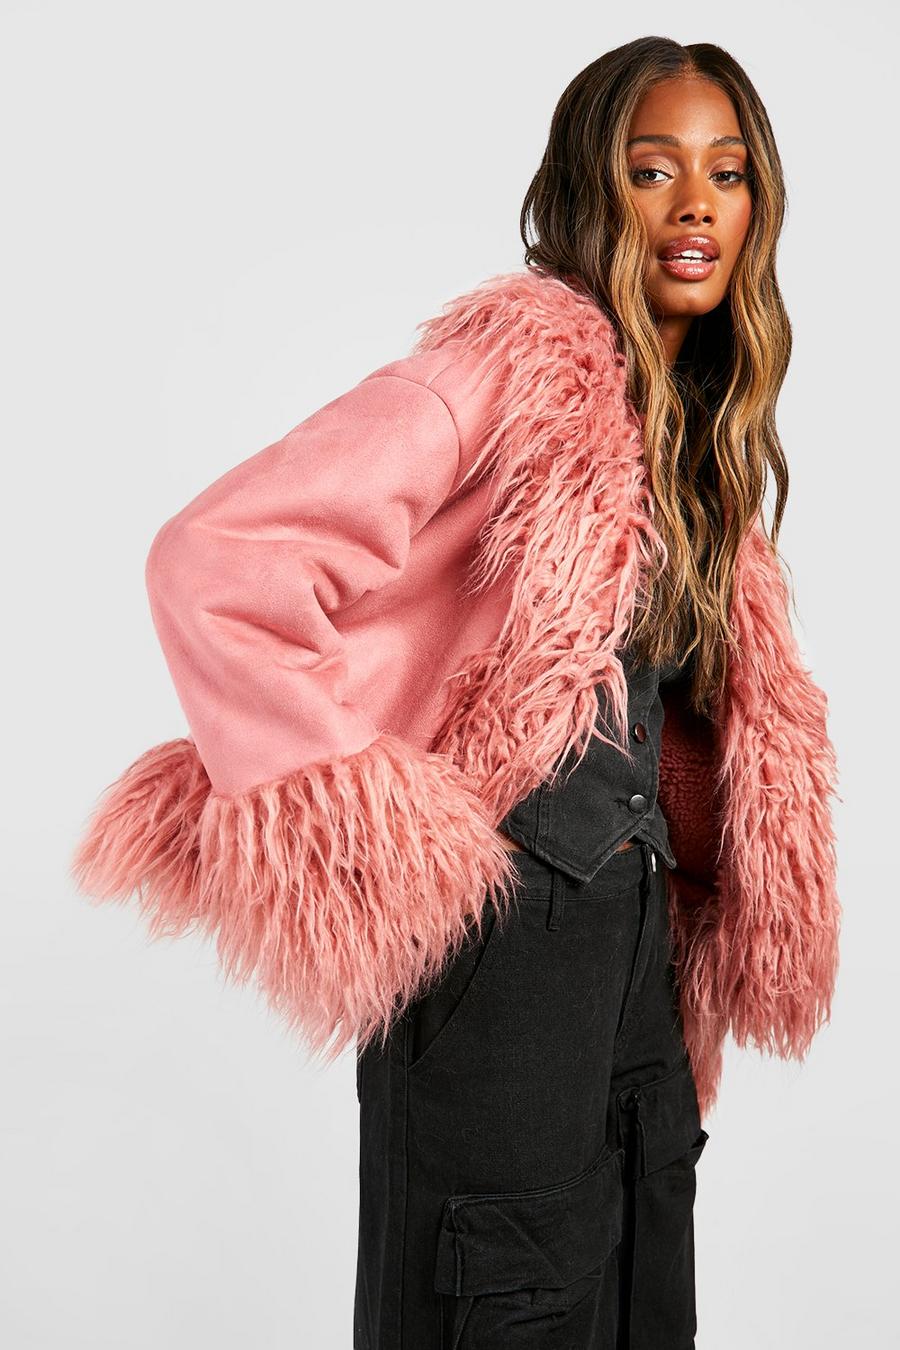 Womens Winter Coats with Faux Fur Lining